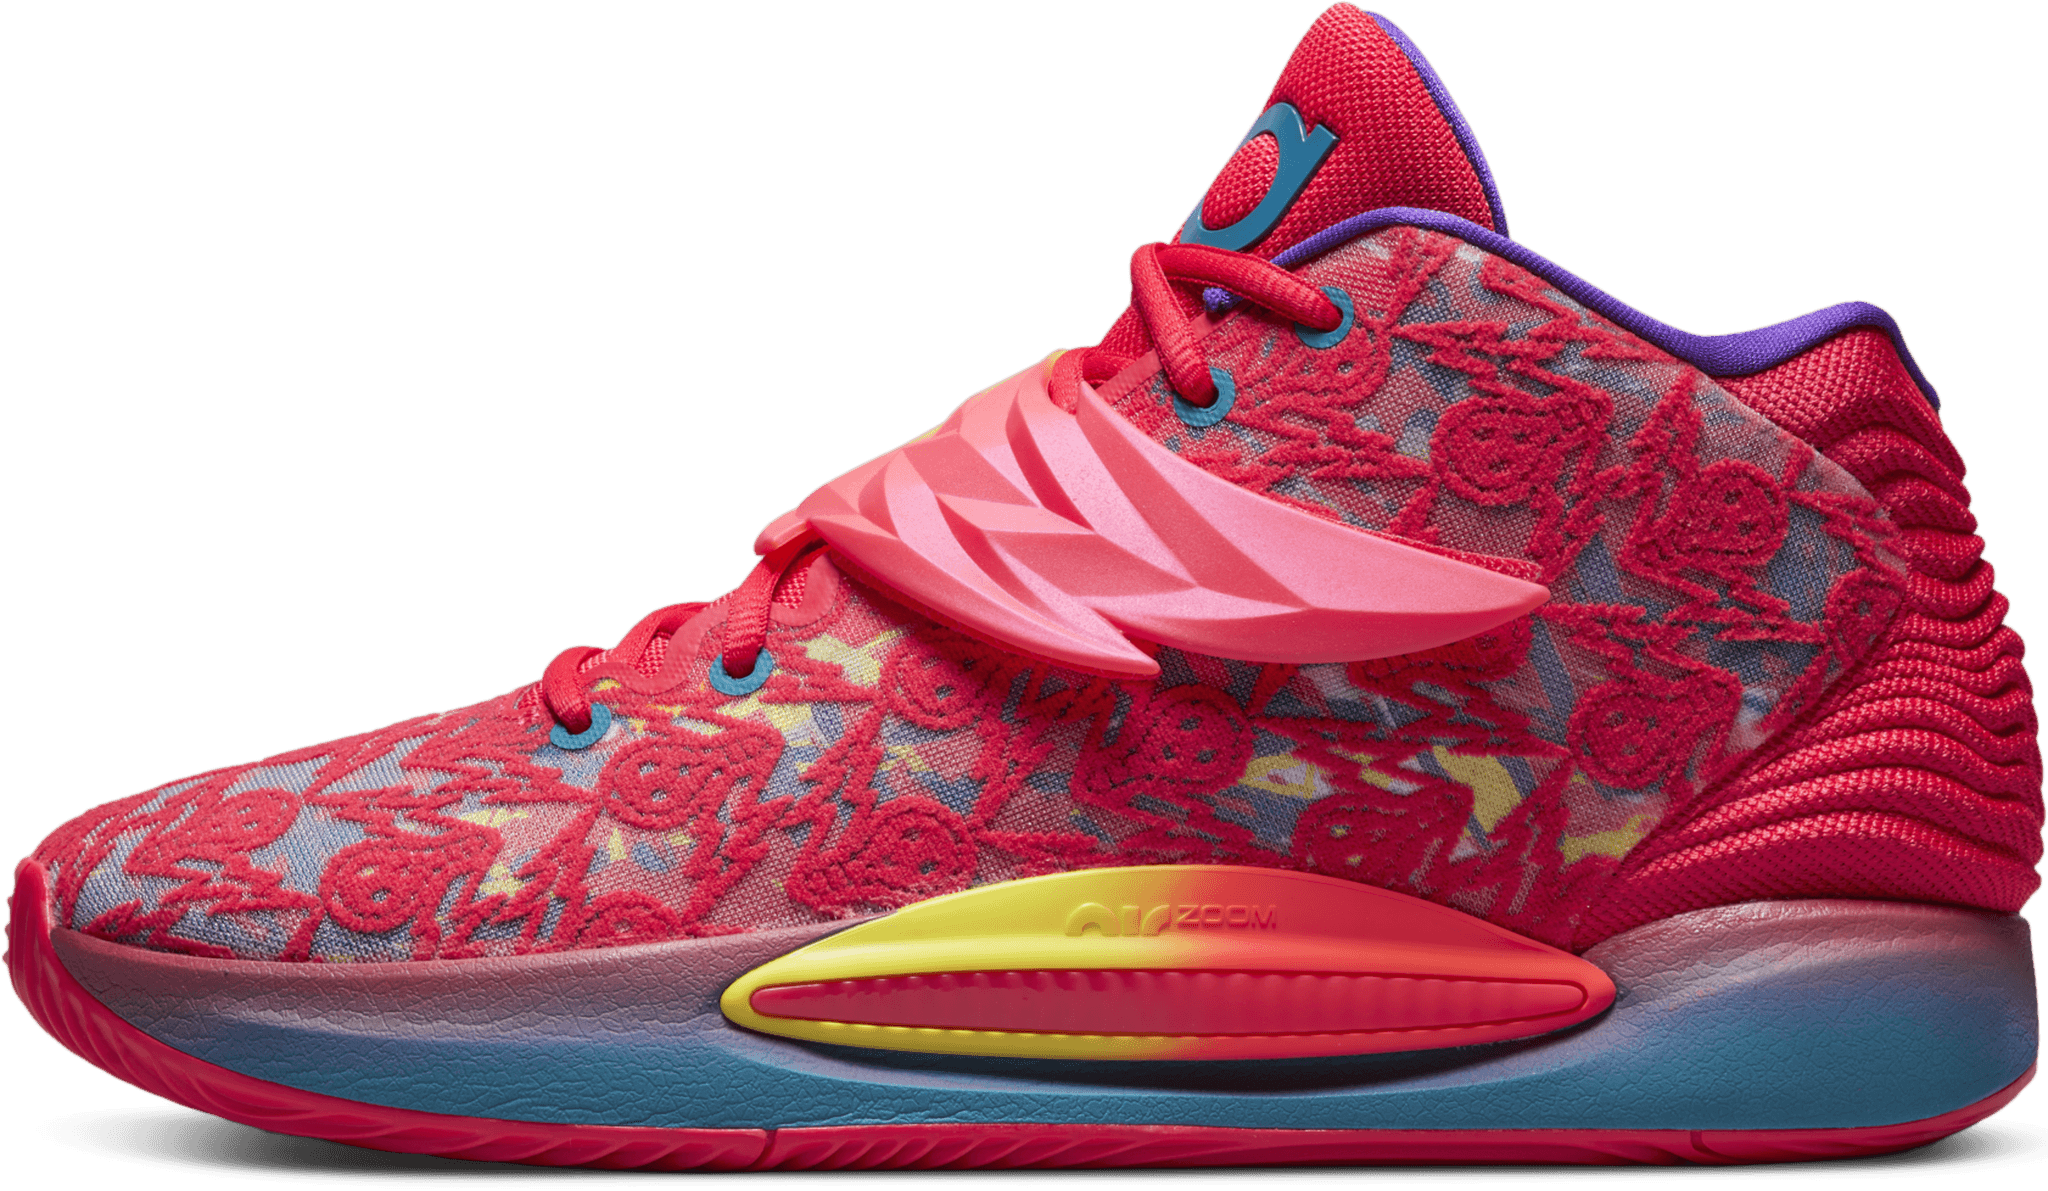 li-ning-way-of-wade-8-review-deals-pics-of-all-colorways